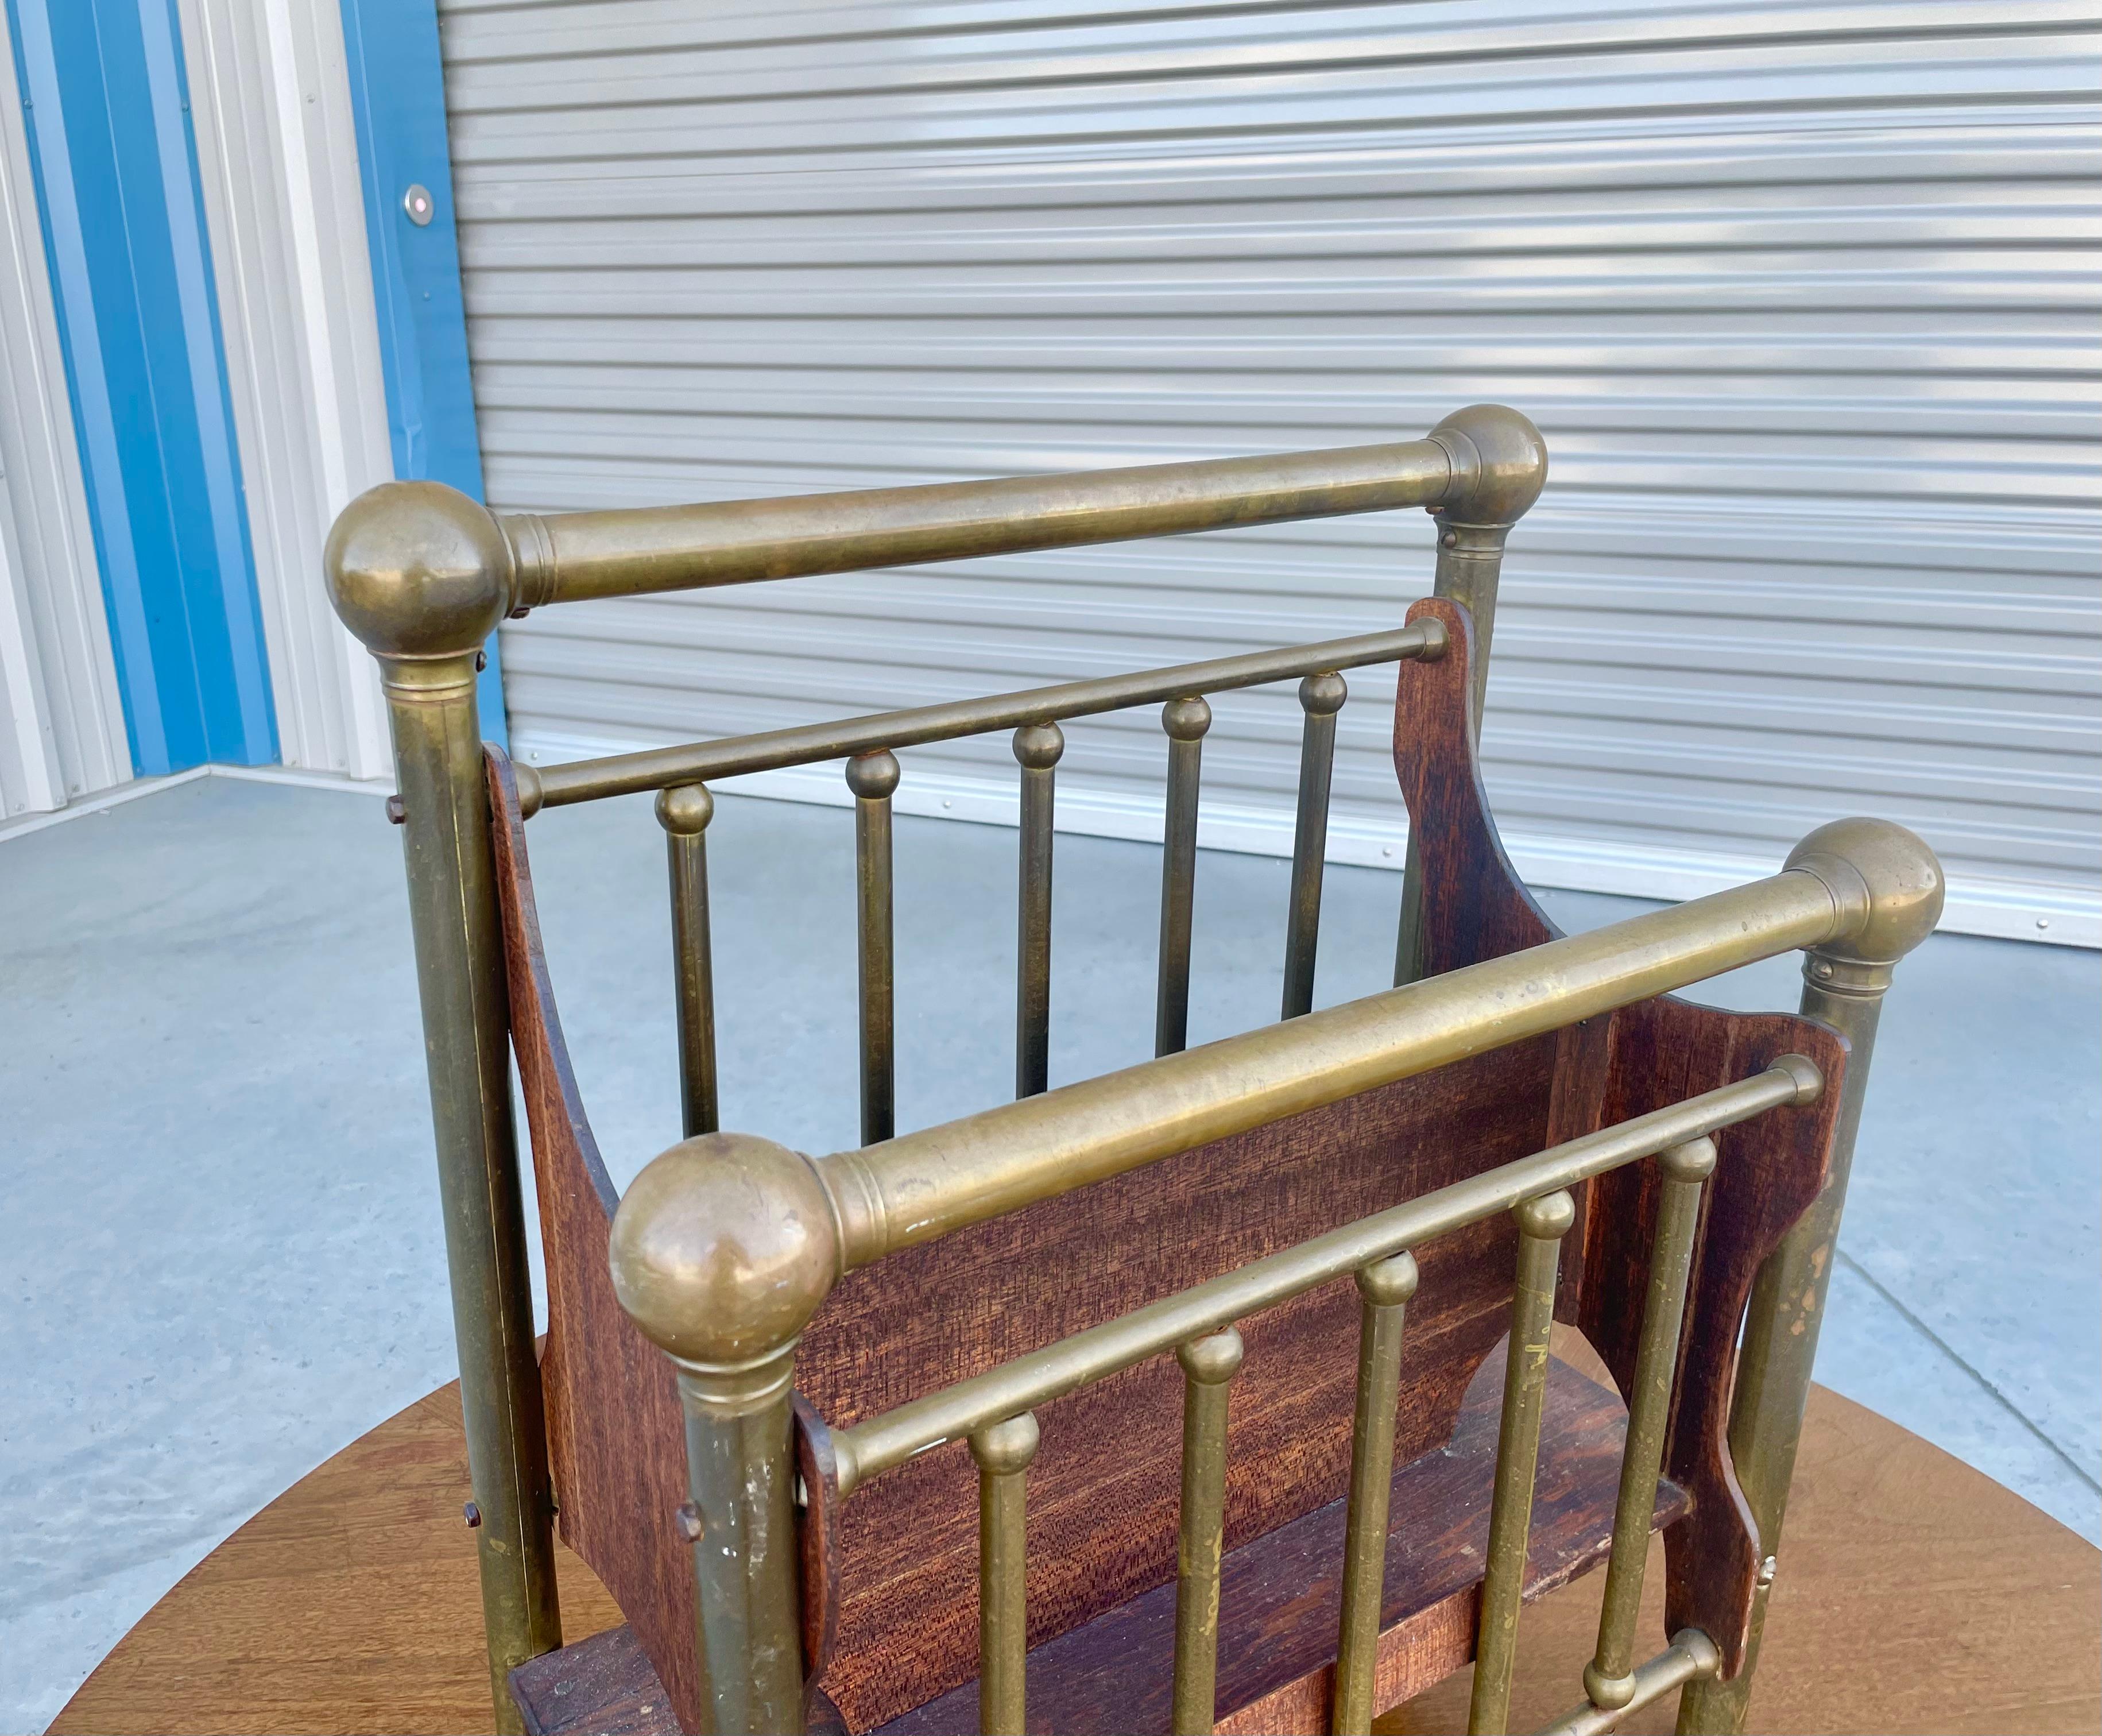 Vintage brass magazine rack designed and manufactured in the United States circa 1950s. This stunning rack features a wooden frame supported by four gorgeous brass legs. What sets it apart, though, are the five brass slats that are located on both